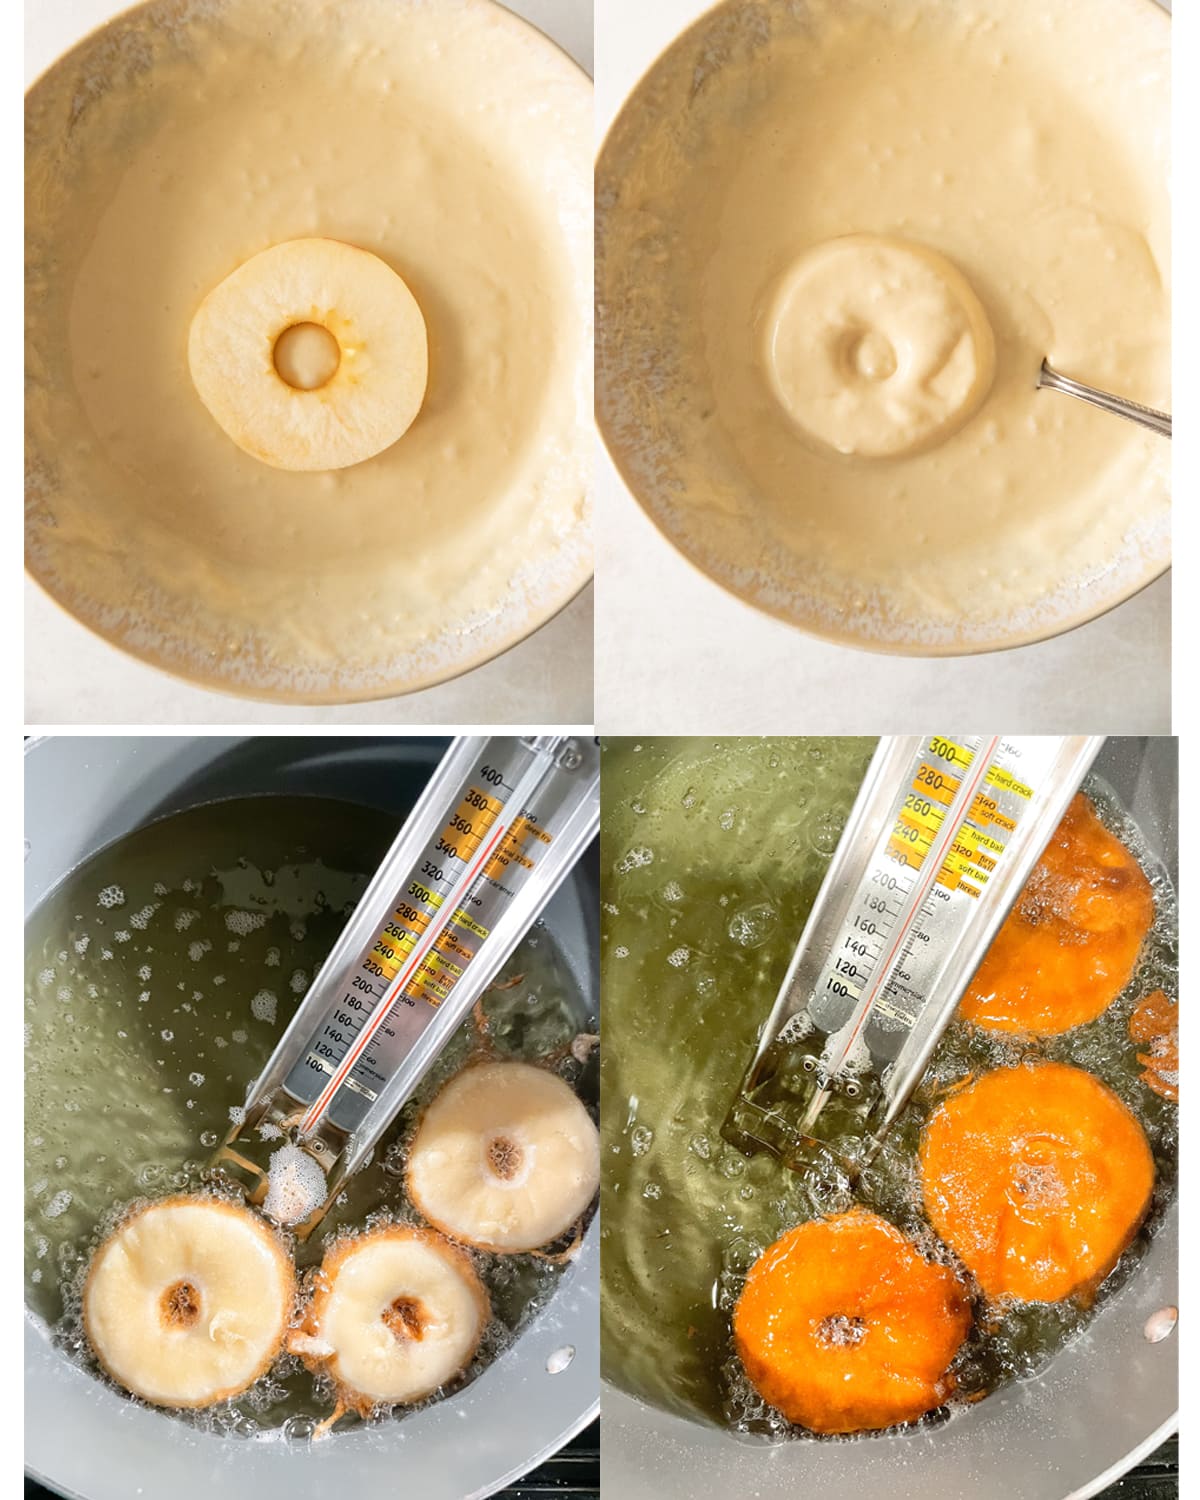 Process images showing how to batter and fry the apple rings. 